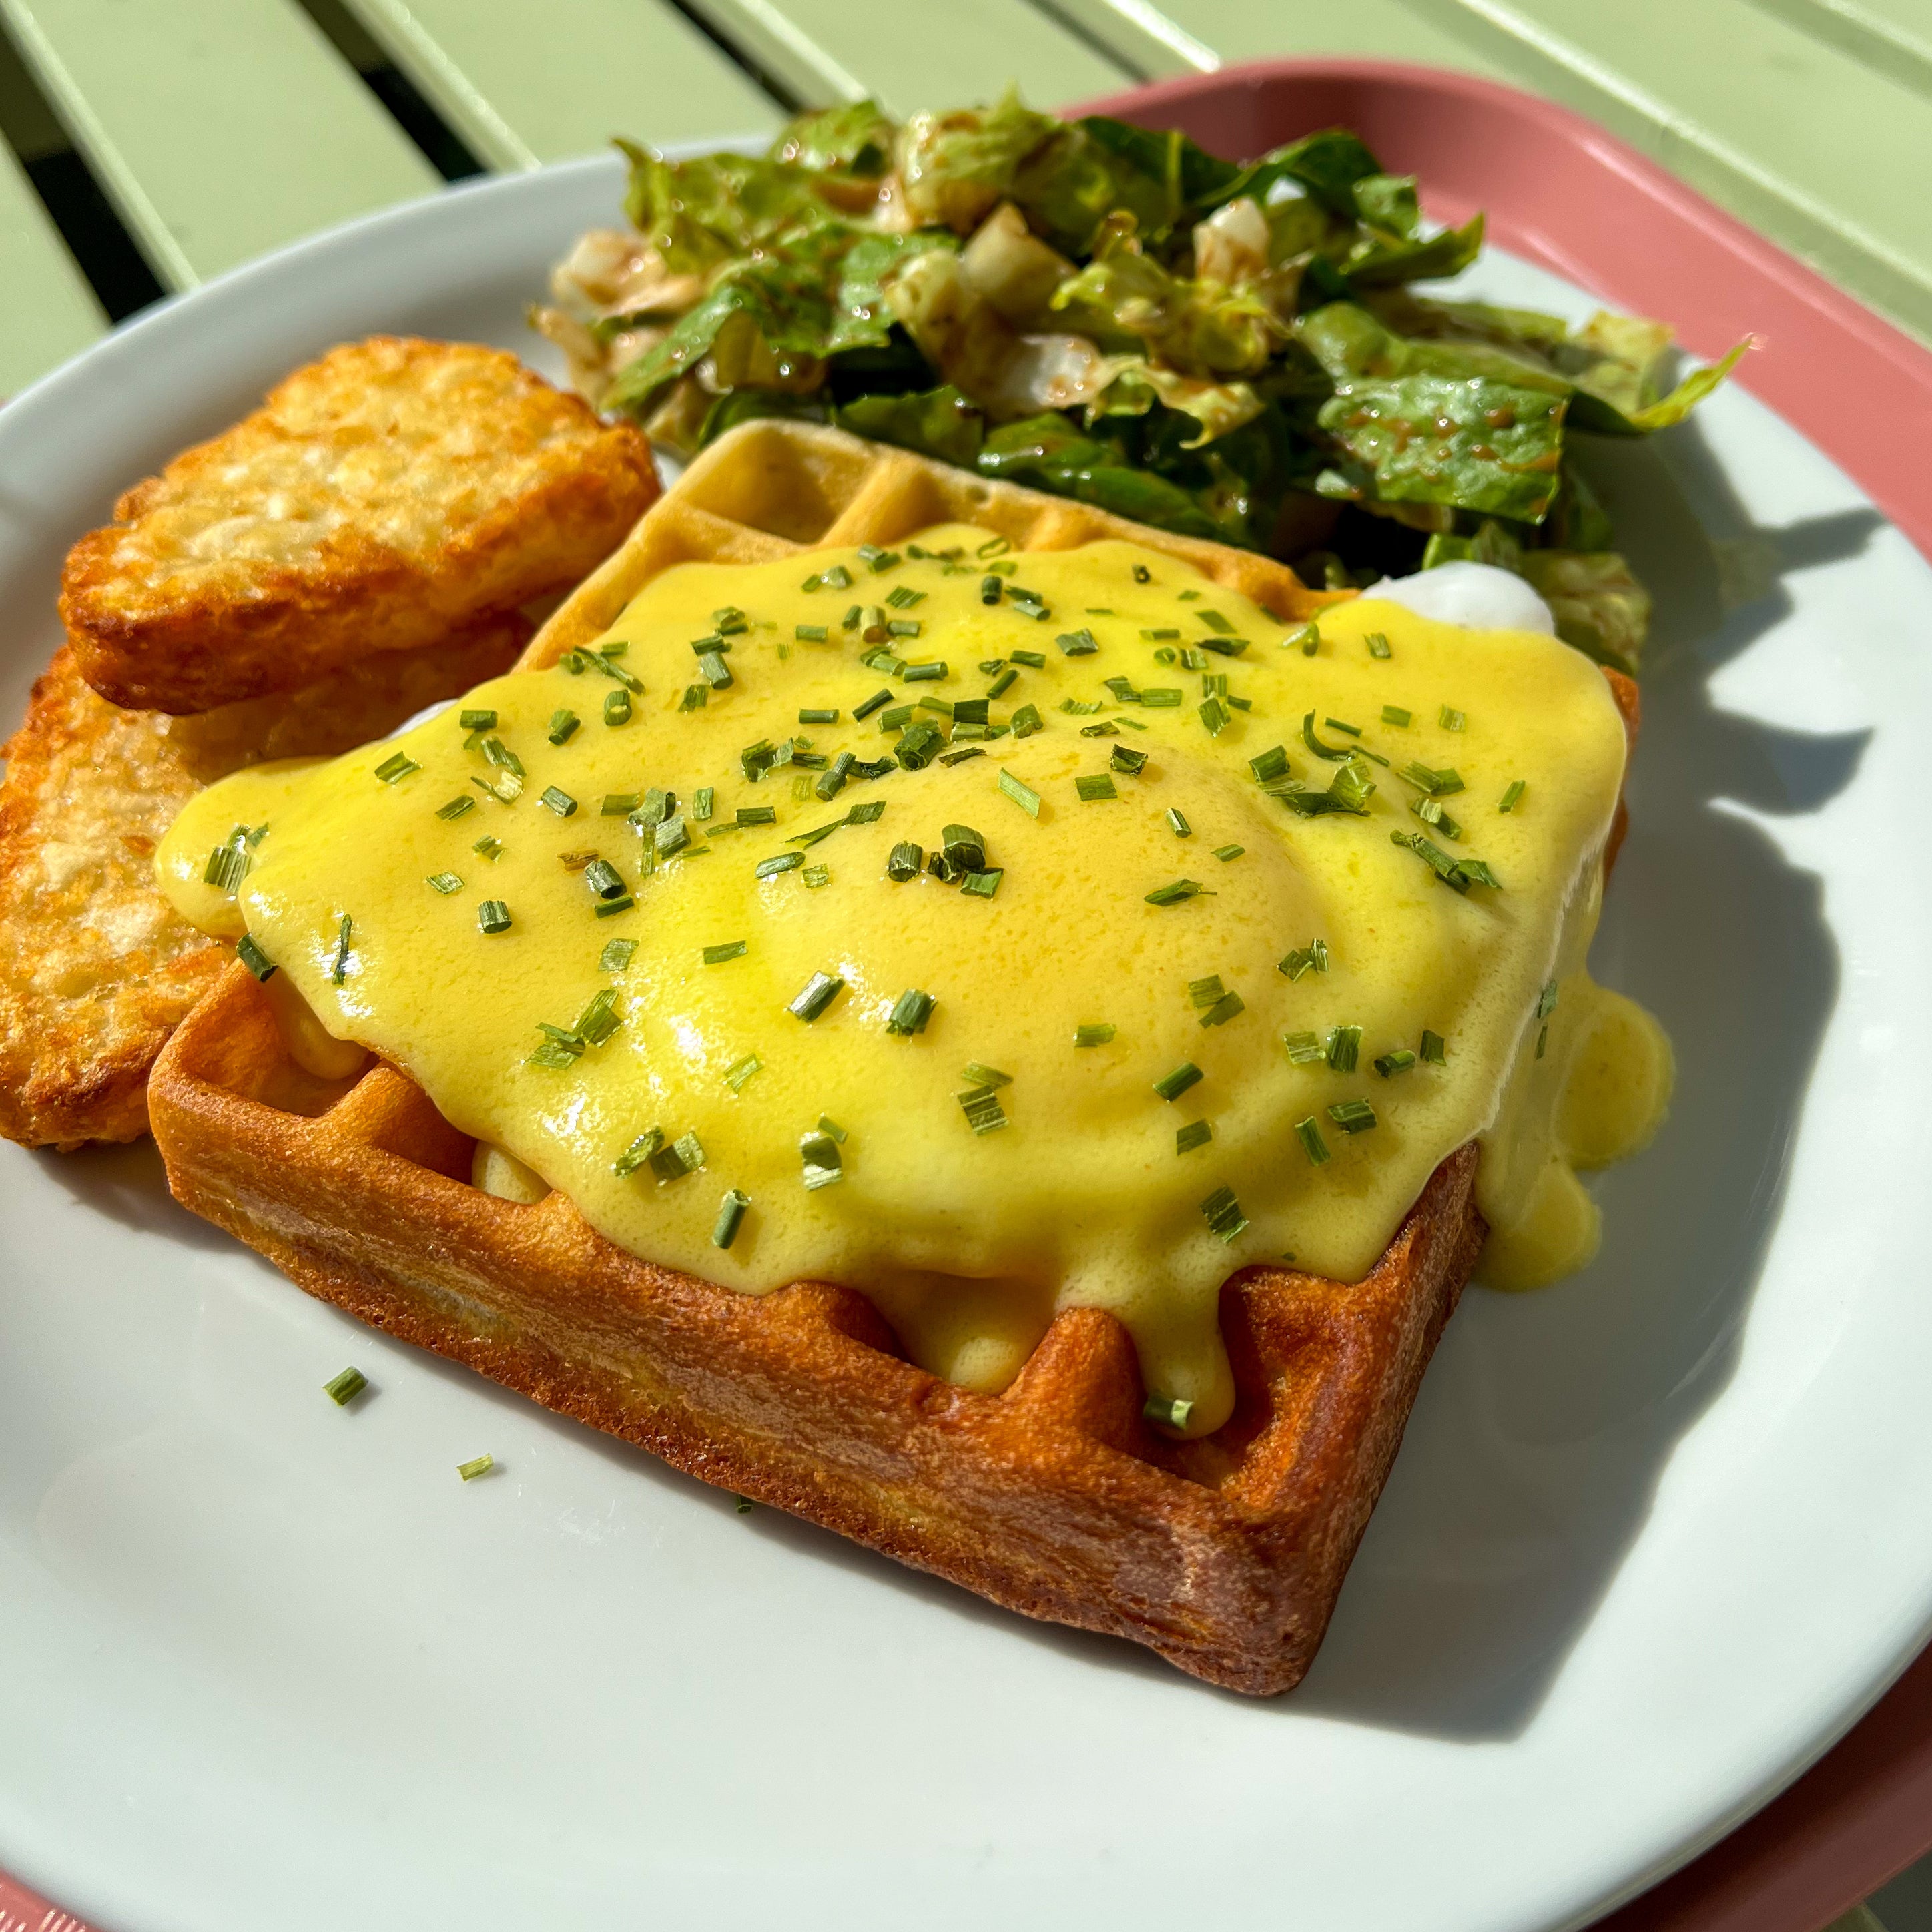 Sunny Benny Waffle with fresh crack sunny side up egg and hollandaise sauce at Nana's Creperie. Perfect brunch option near you.